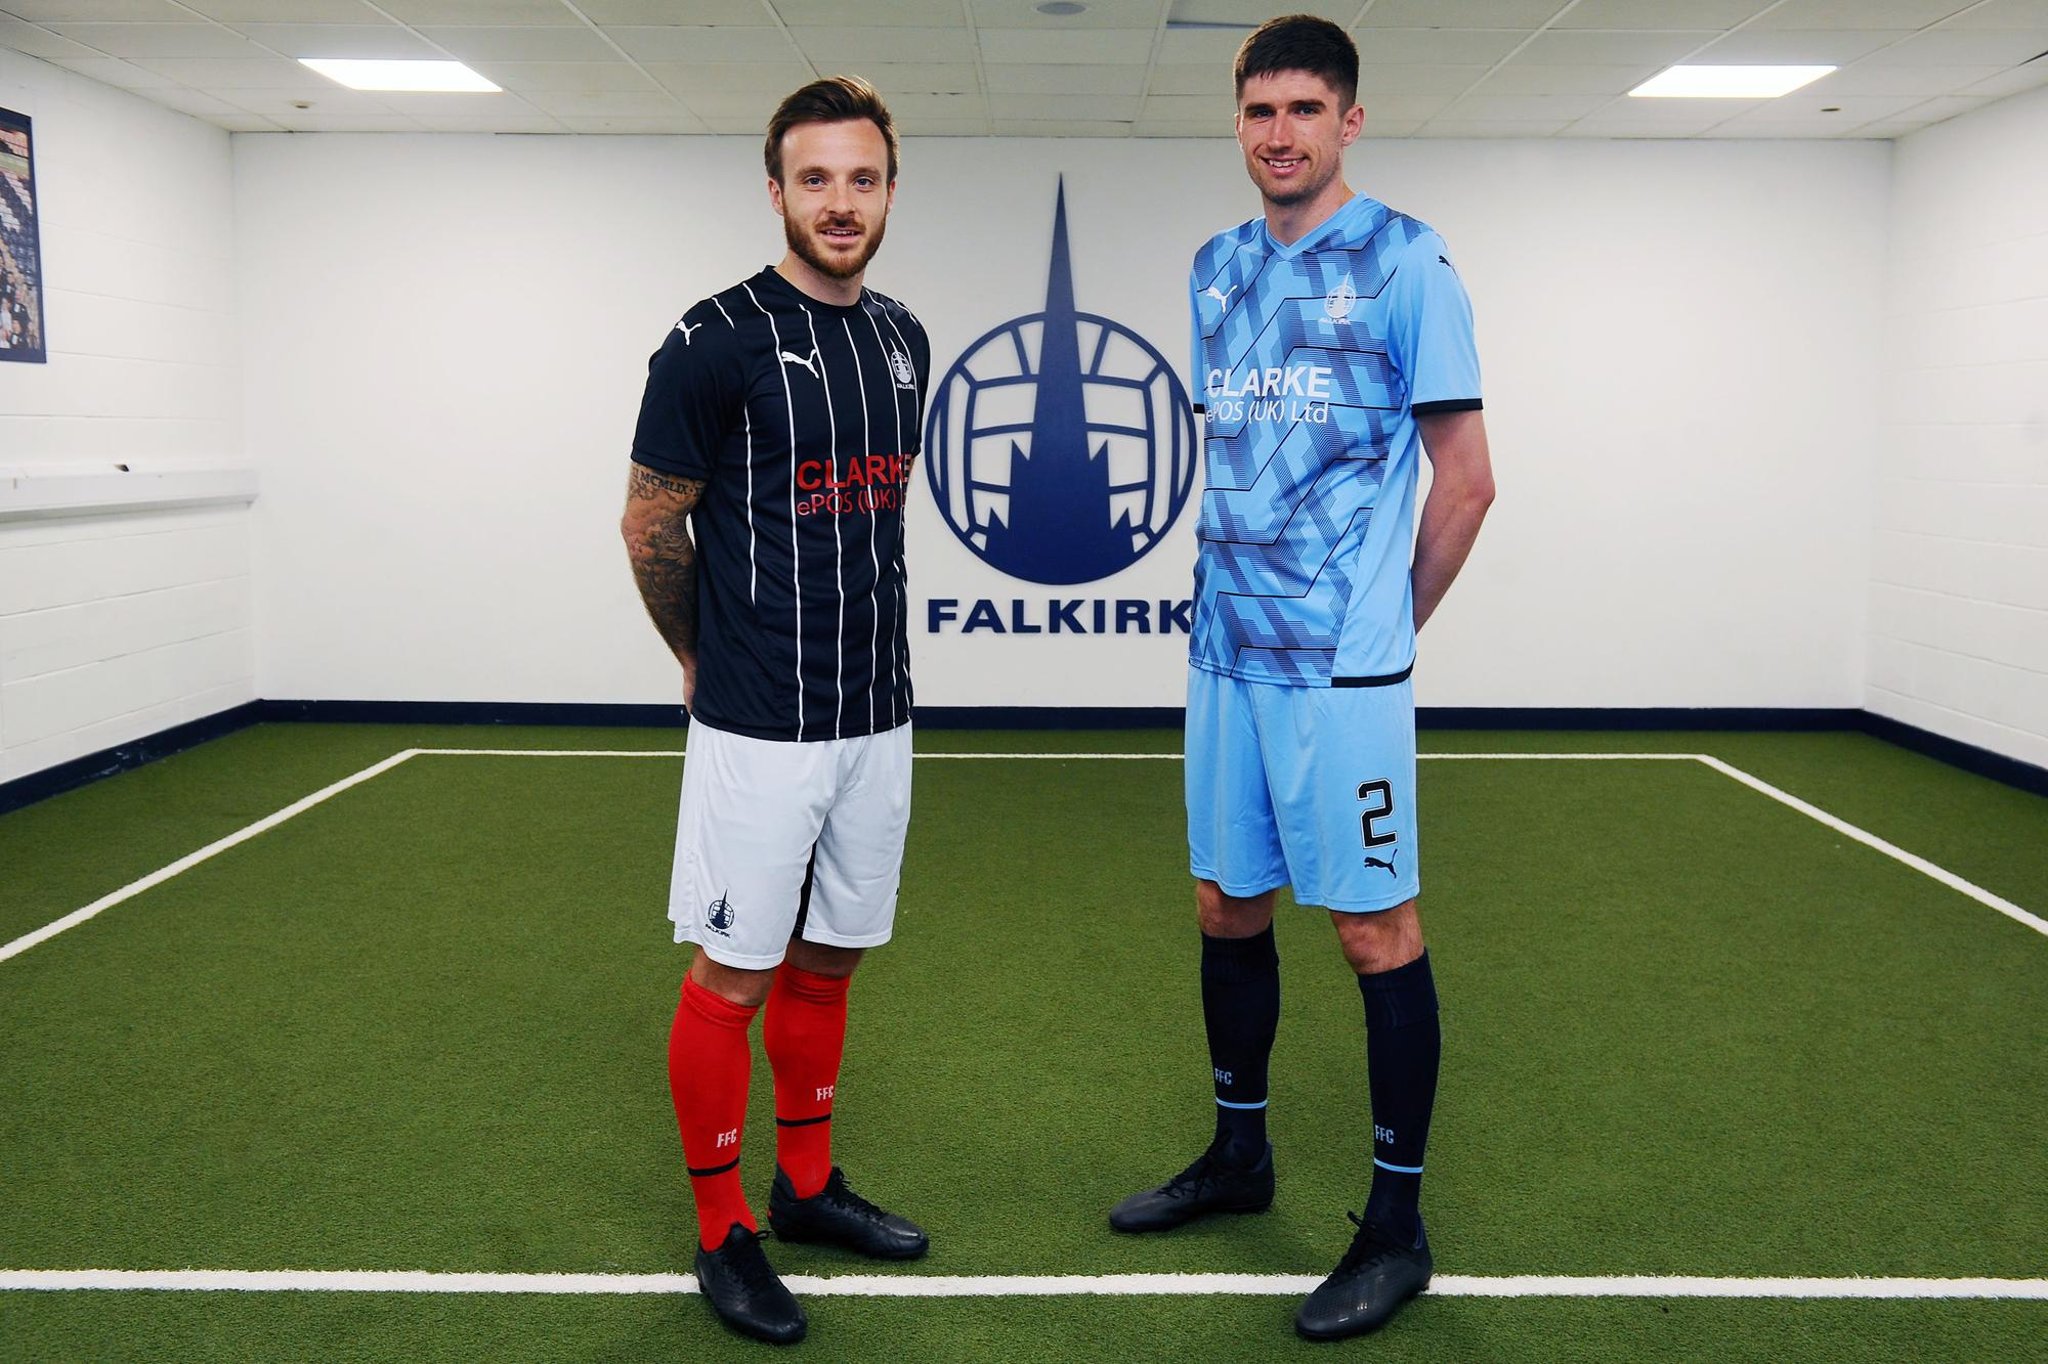 Falkirk launch new home and away kits for 2021/22 season | Falkirk Herald